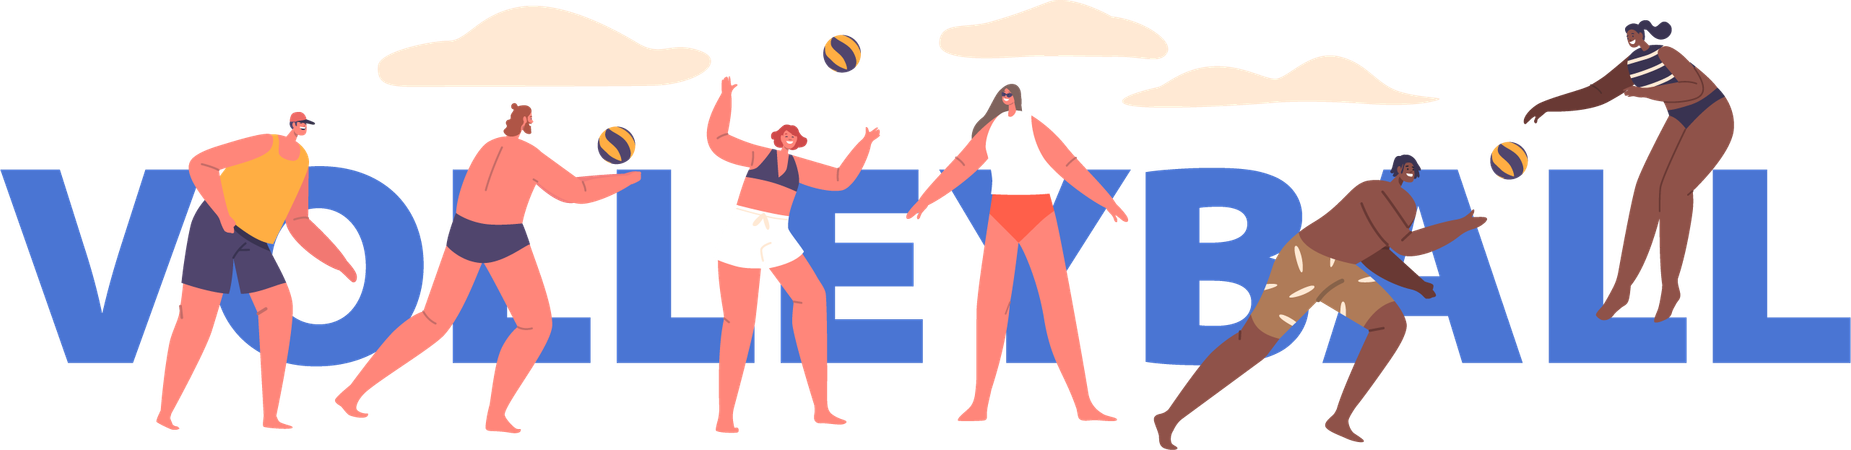 Joyful People Characters Dive And Spike On The Sandy Court  Illustration